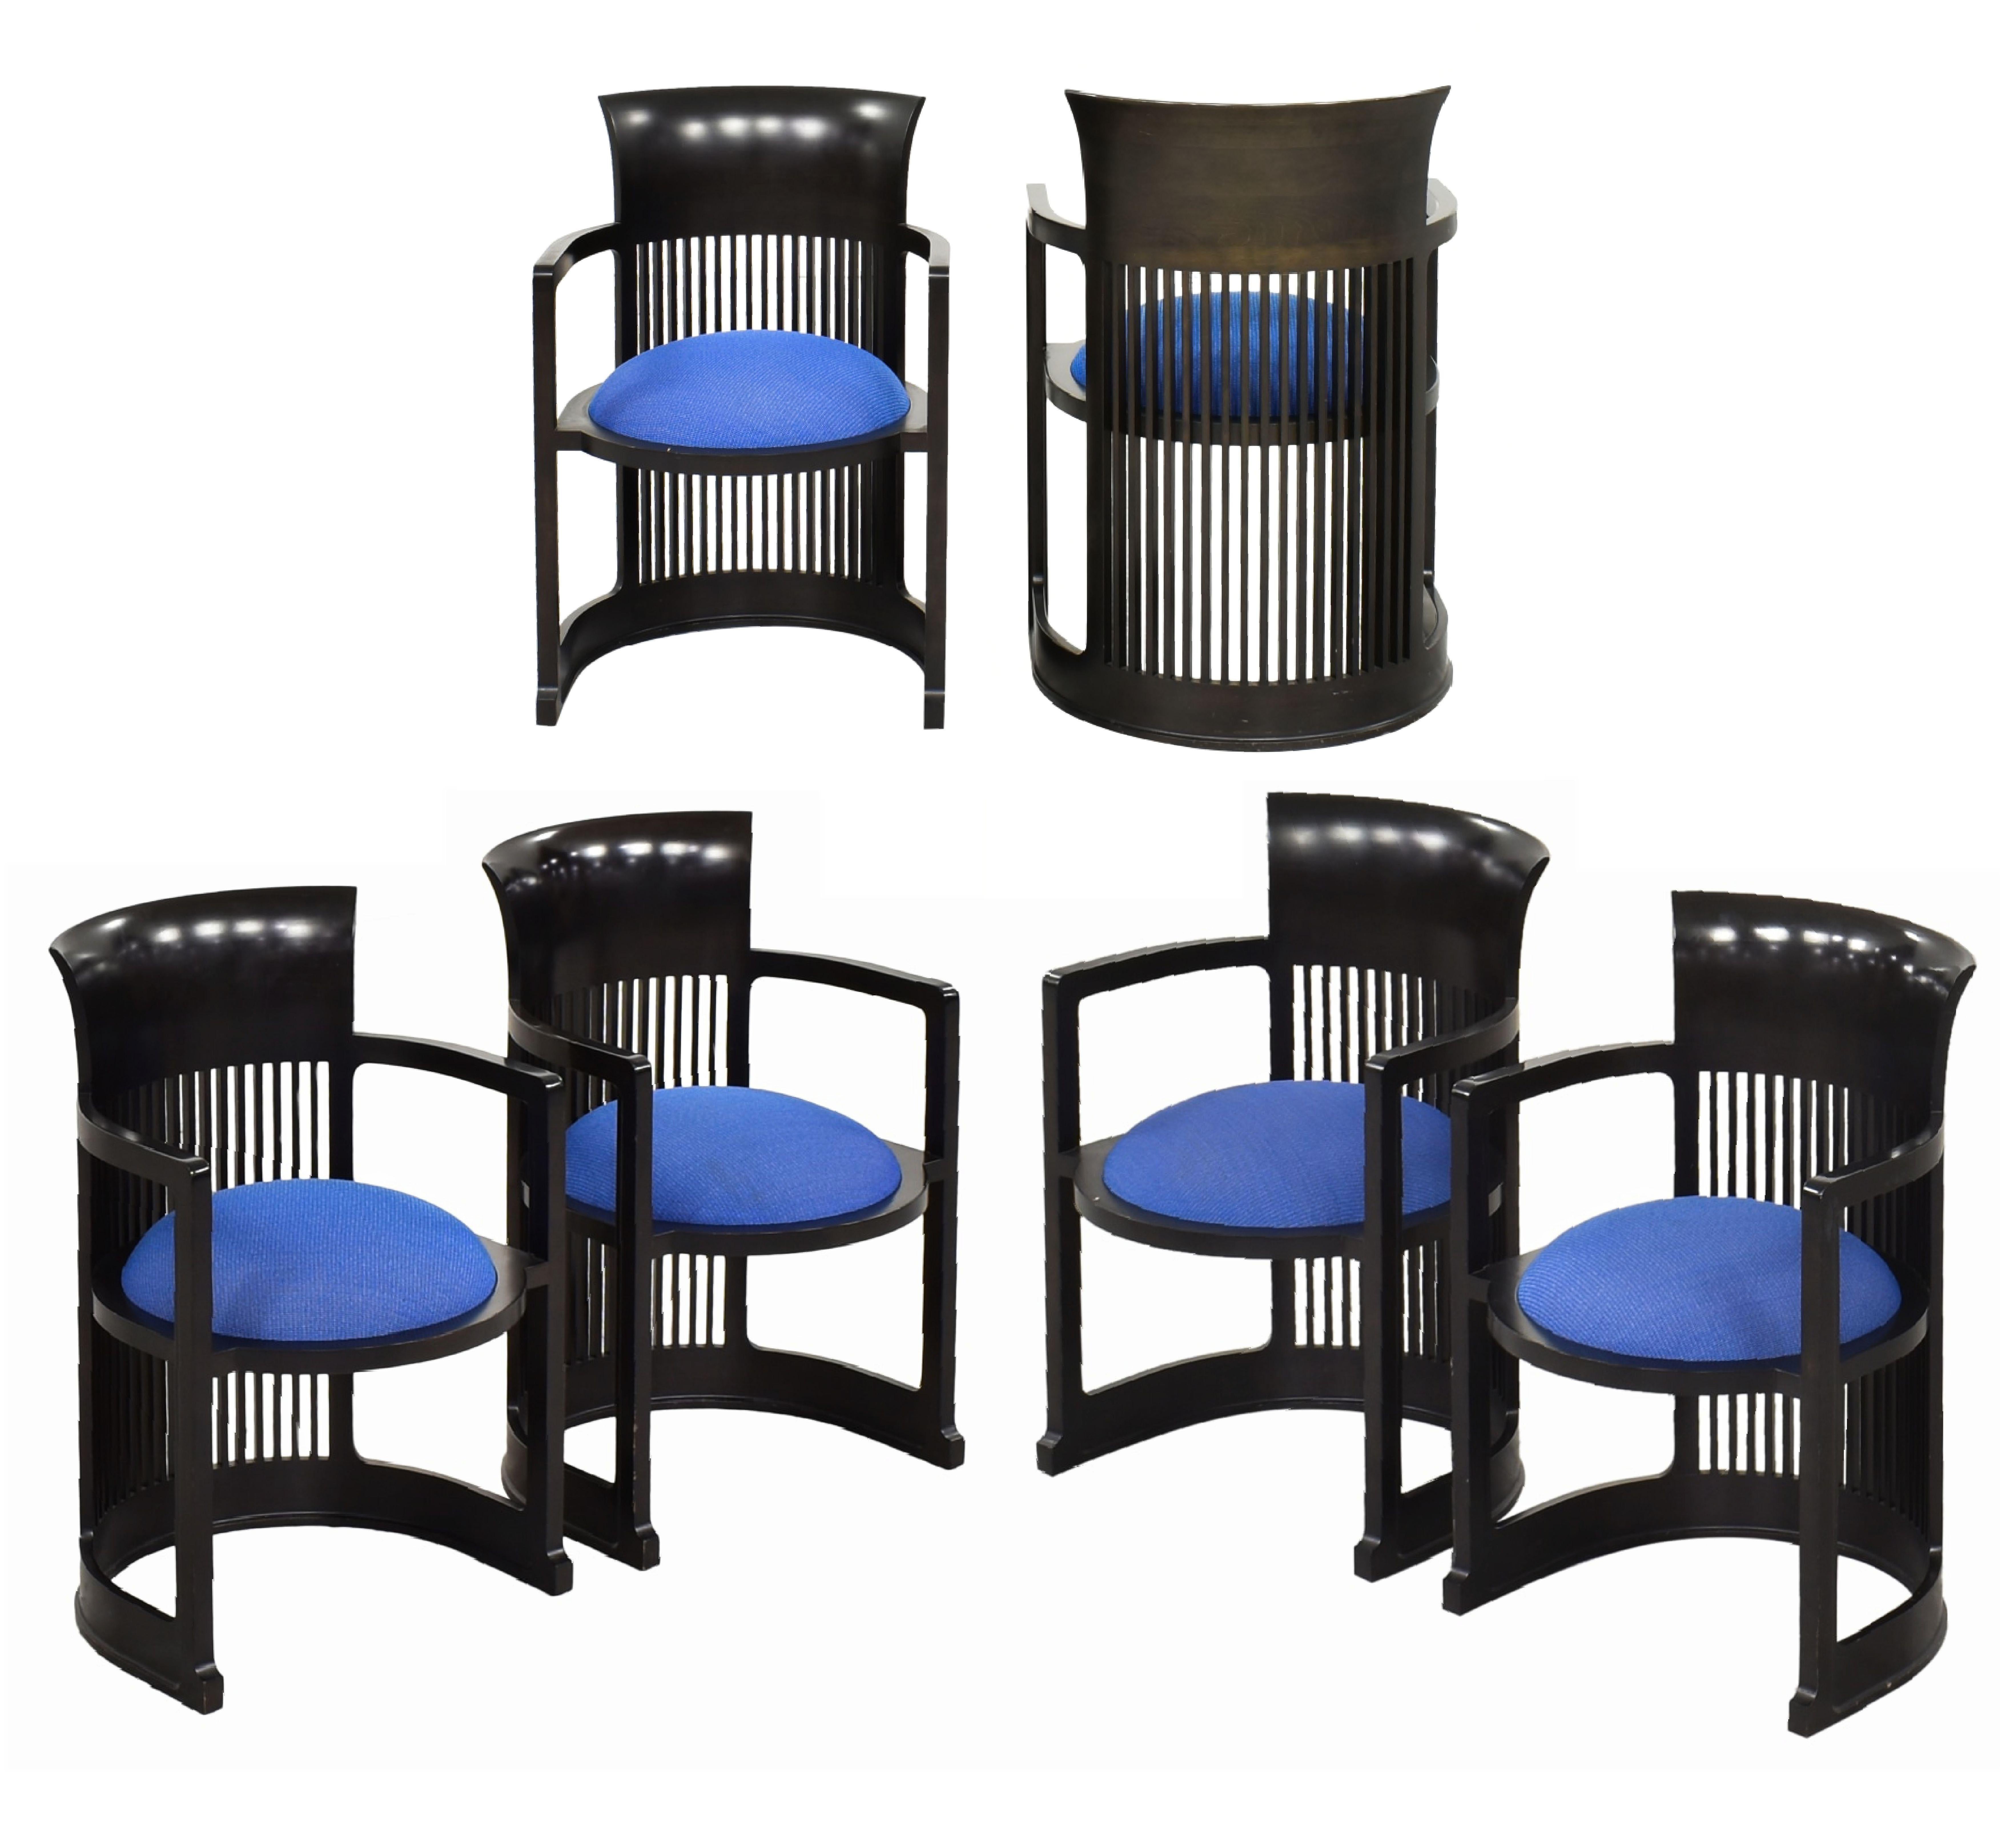 Frank Lloyd Wright 606 Taliesin Barrel Chairs Ebonized, Cassina, Set of 6, Italy.

 A timeless design informed by exceptional constructive complexity, the iconic Barrel chair was created in 1937 by Frank Lloyd Wright, based on an original design